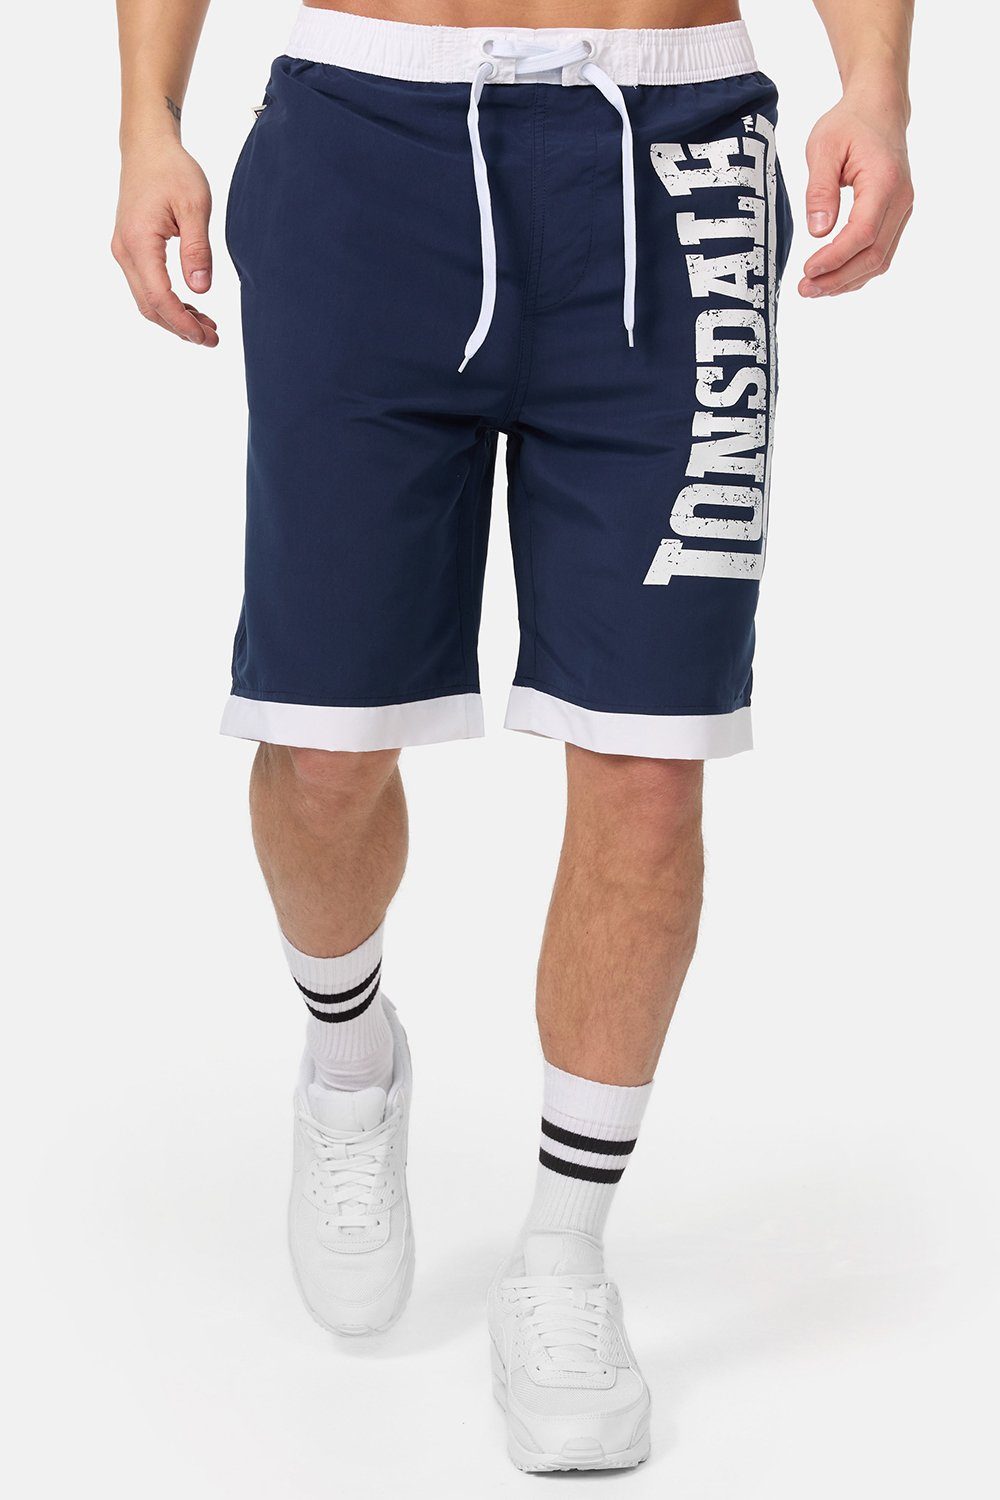 Navy/White CLENNELL Lonsdale Badehose